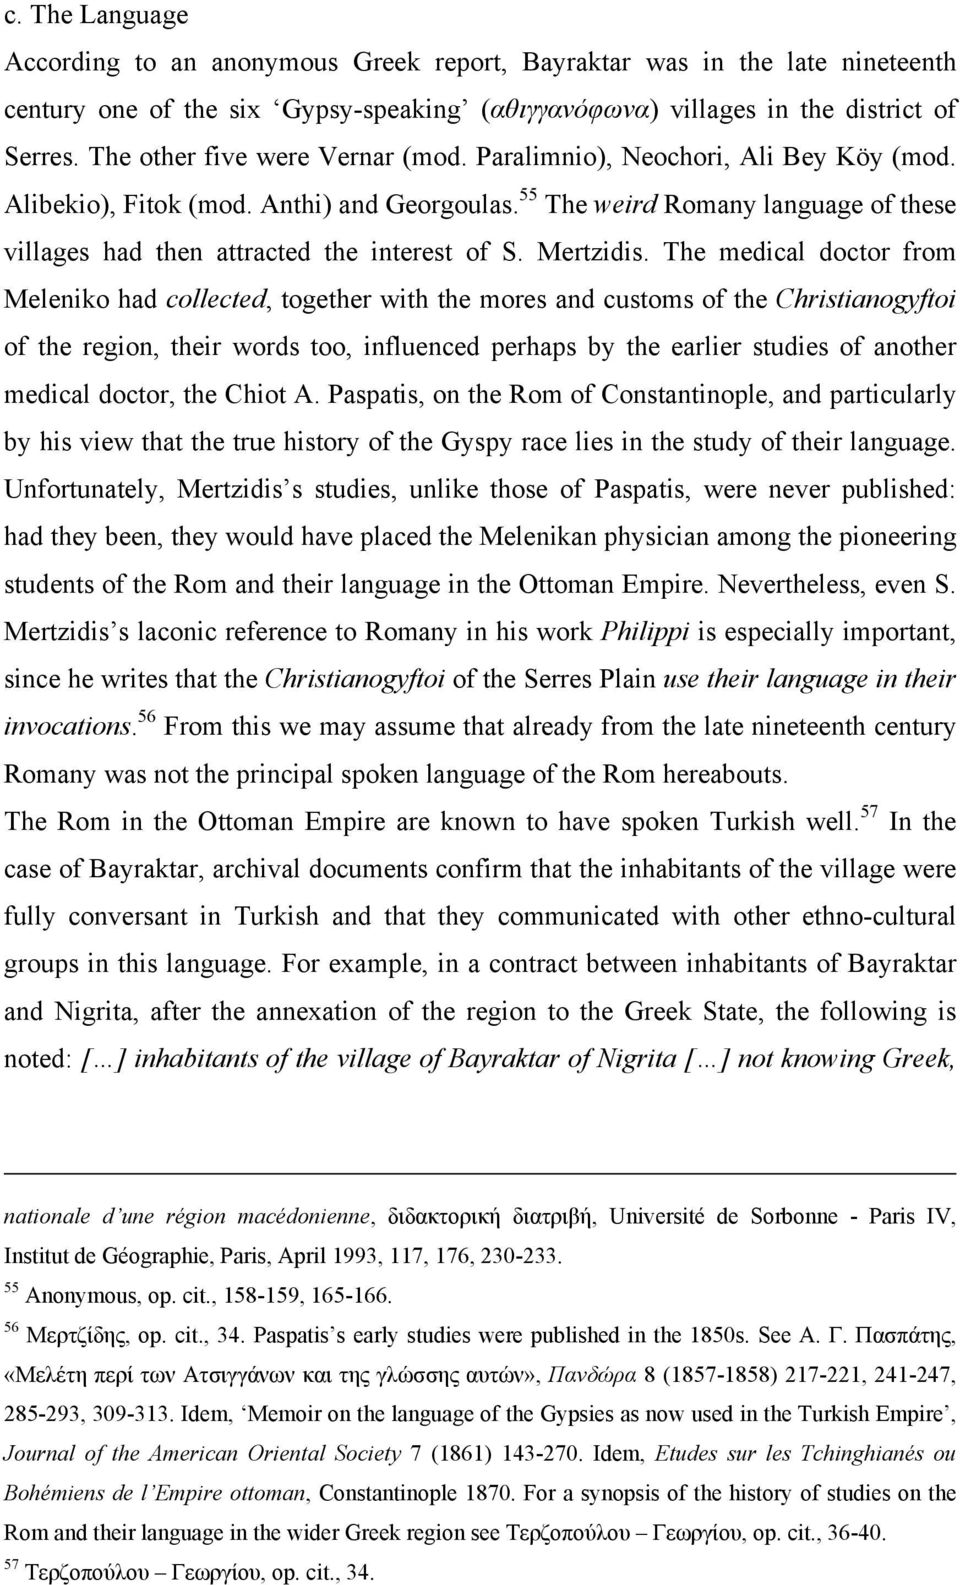 55 The weird Romany language of these villages had then attracted the interest of S. Mertzidis.